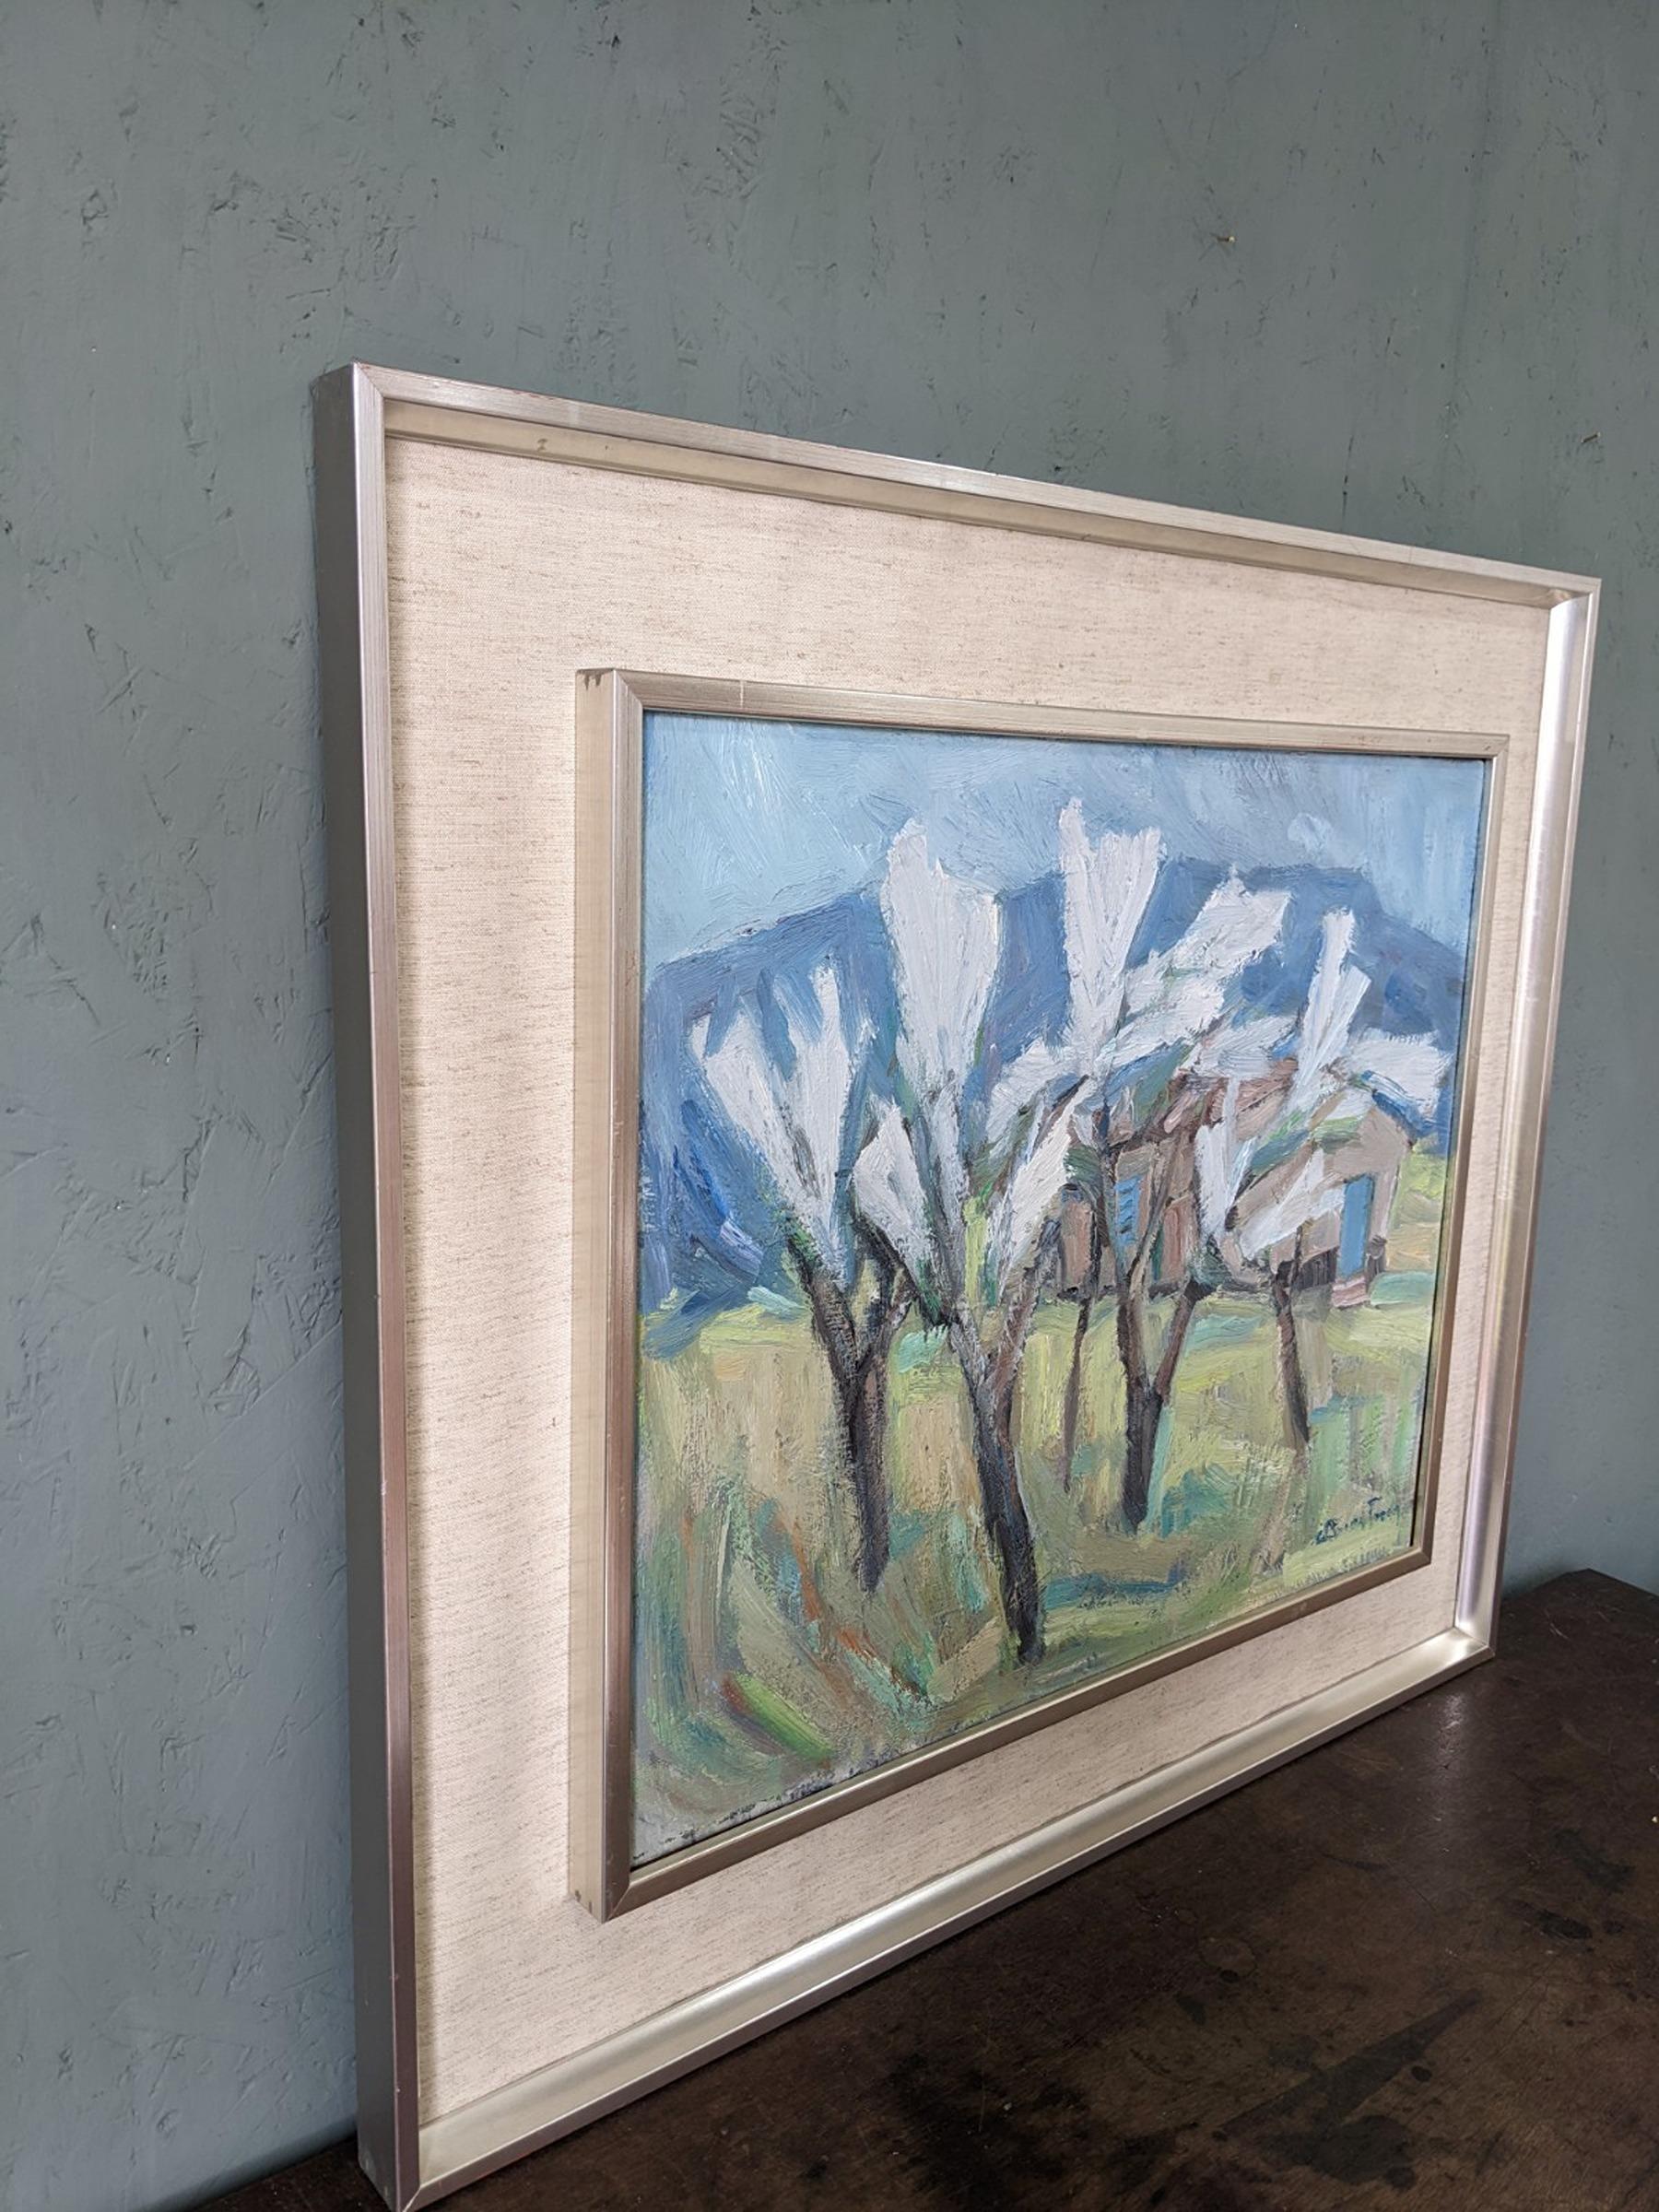 WHITE TREES
Size: 66 x 75 cm (including frame)
Oil on canvas

An expressive and atmospheric mid-century modernist landscape composition, executed in oil onto canvas.

The foreground of the painting presents a group of tall and slender white trees.